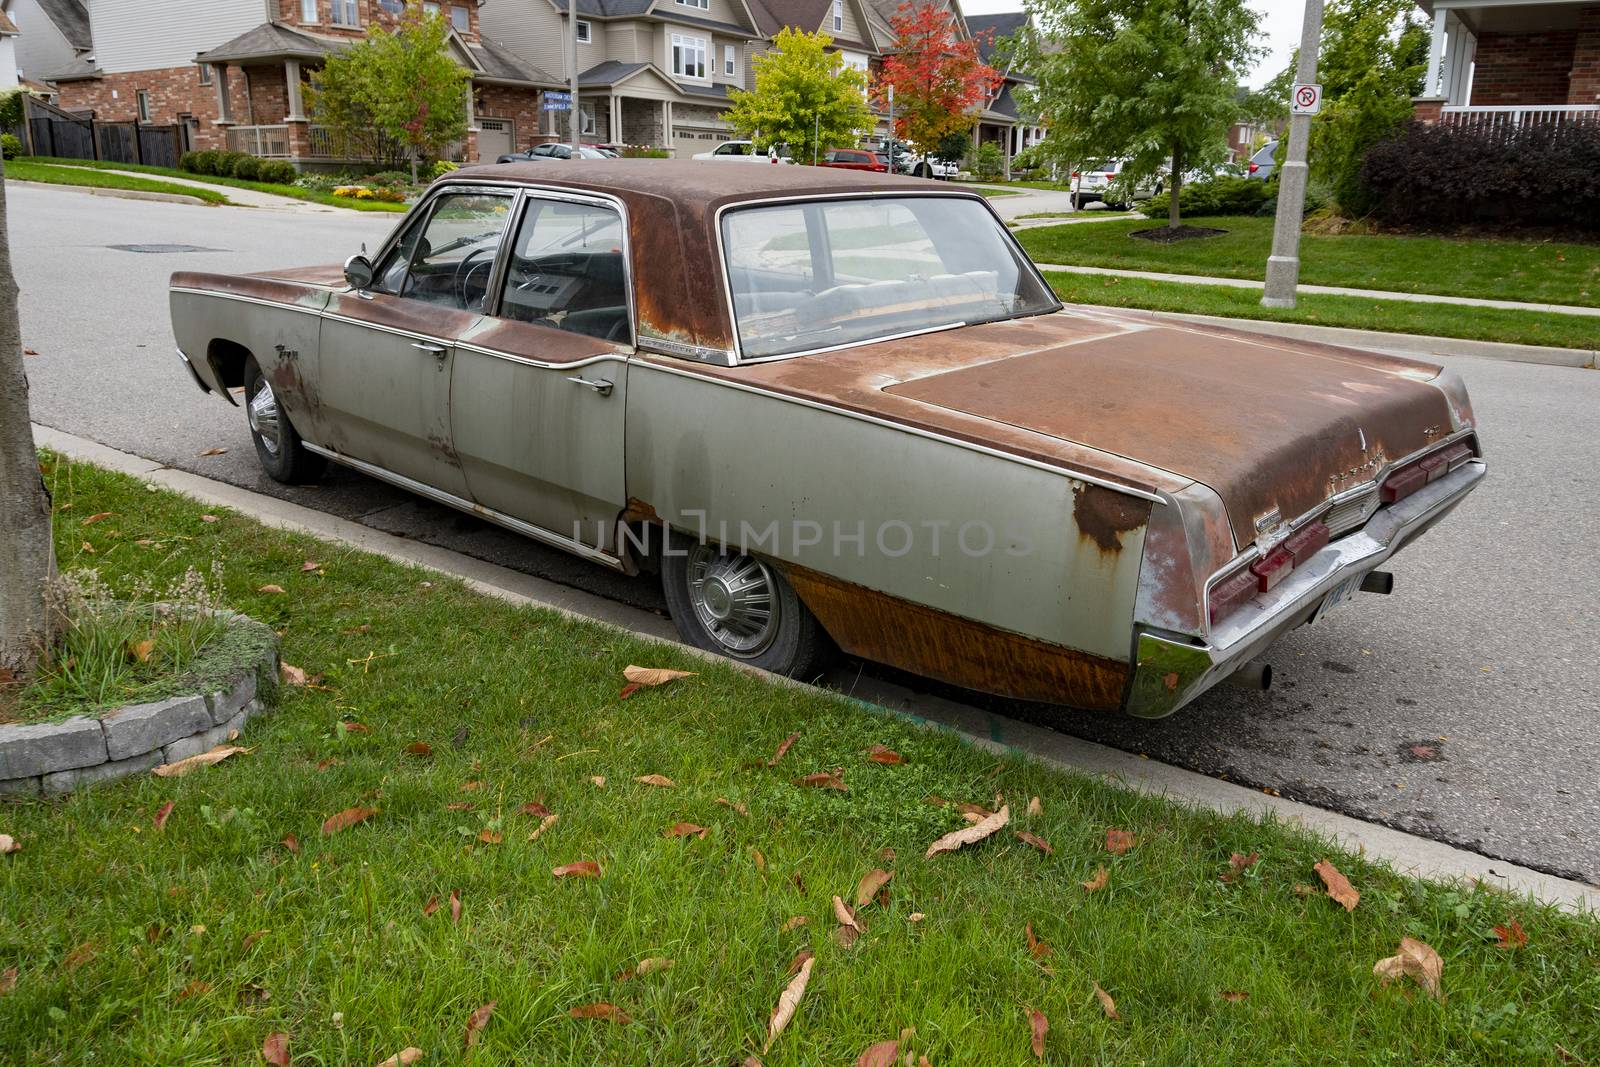 The car arrived and is standing on the street all rusty, hood, roof and trunk